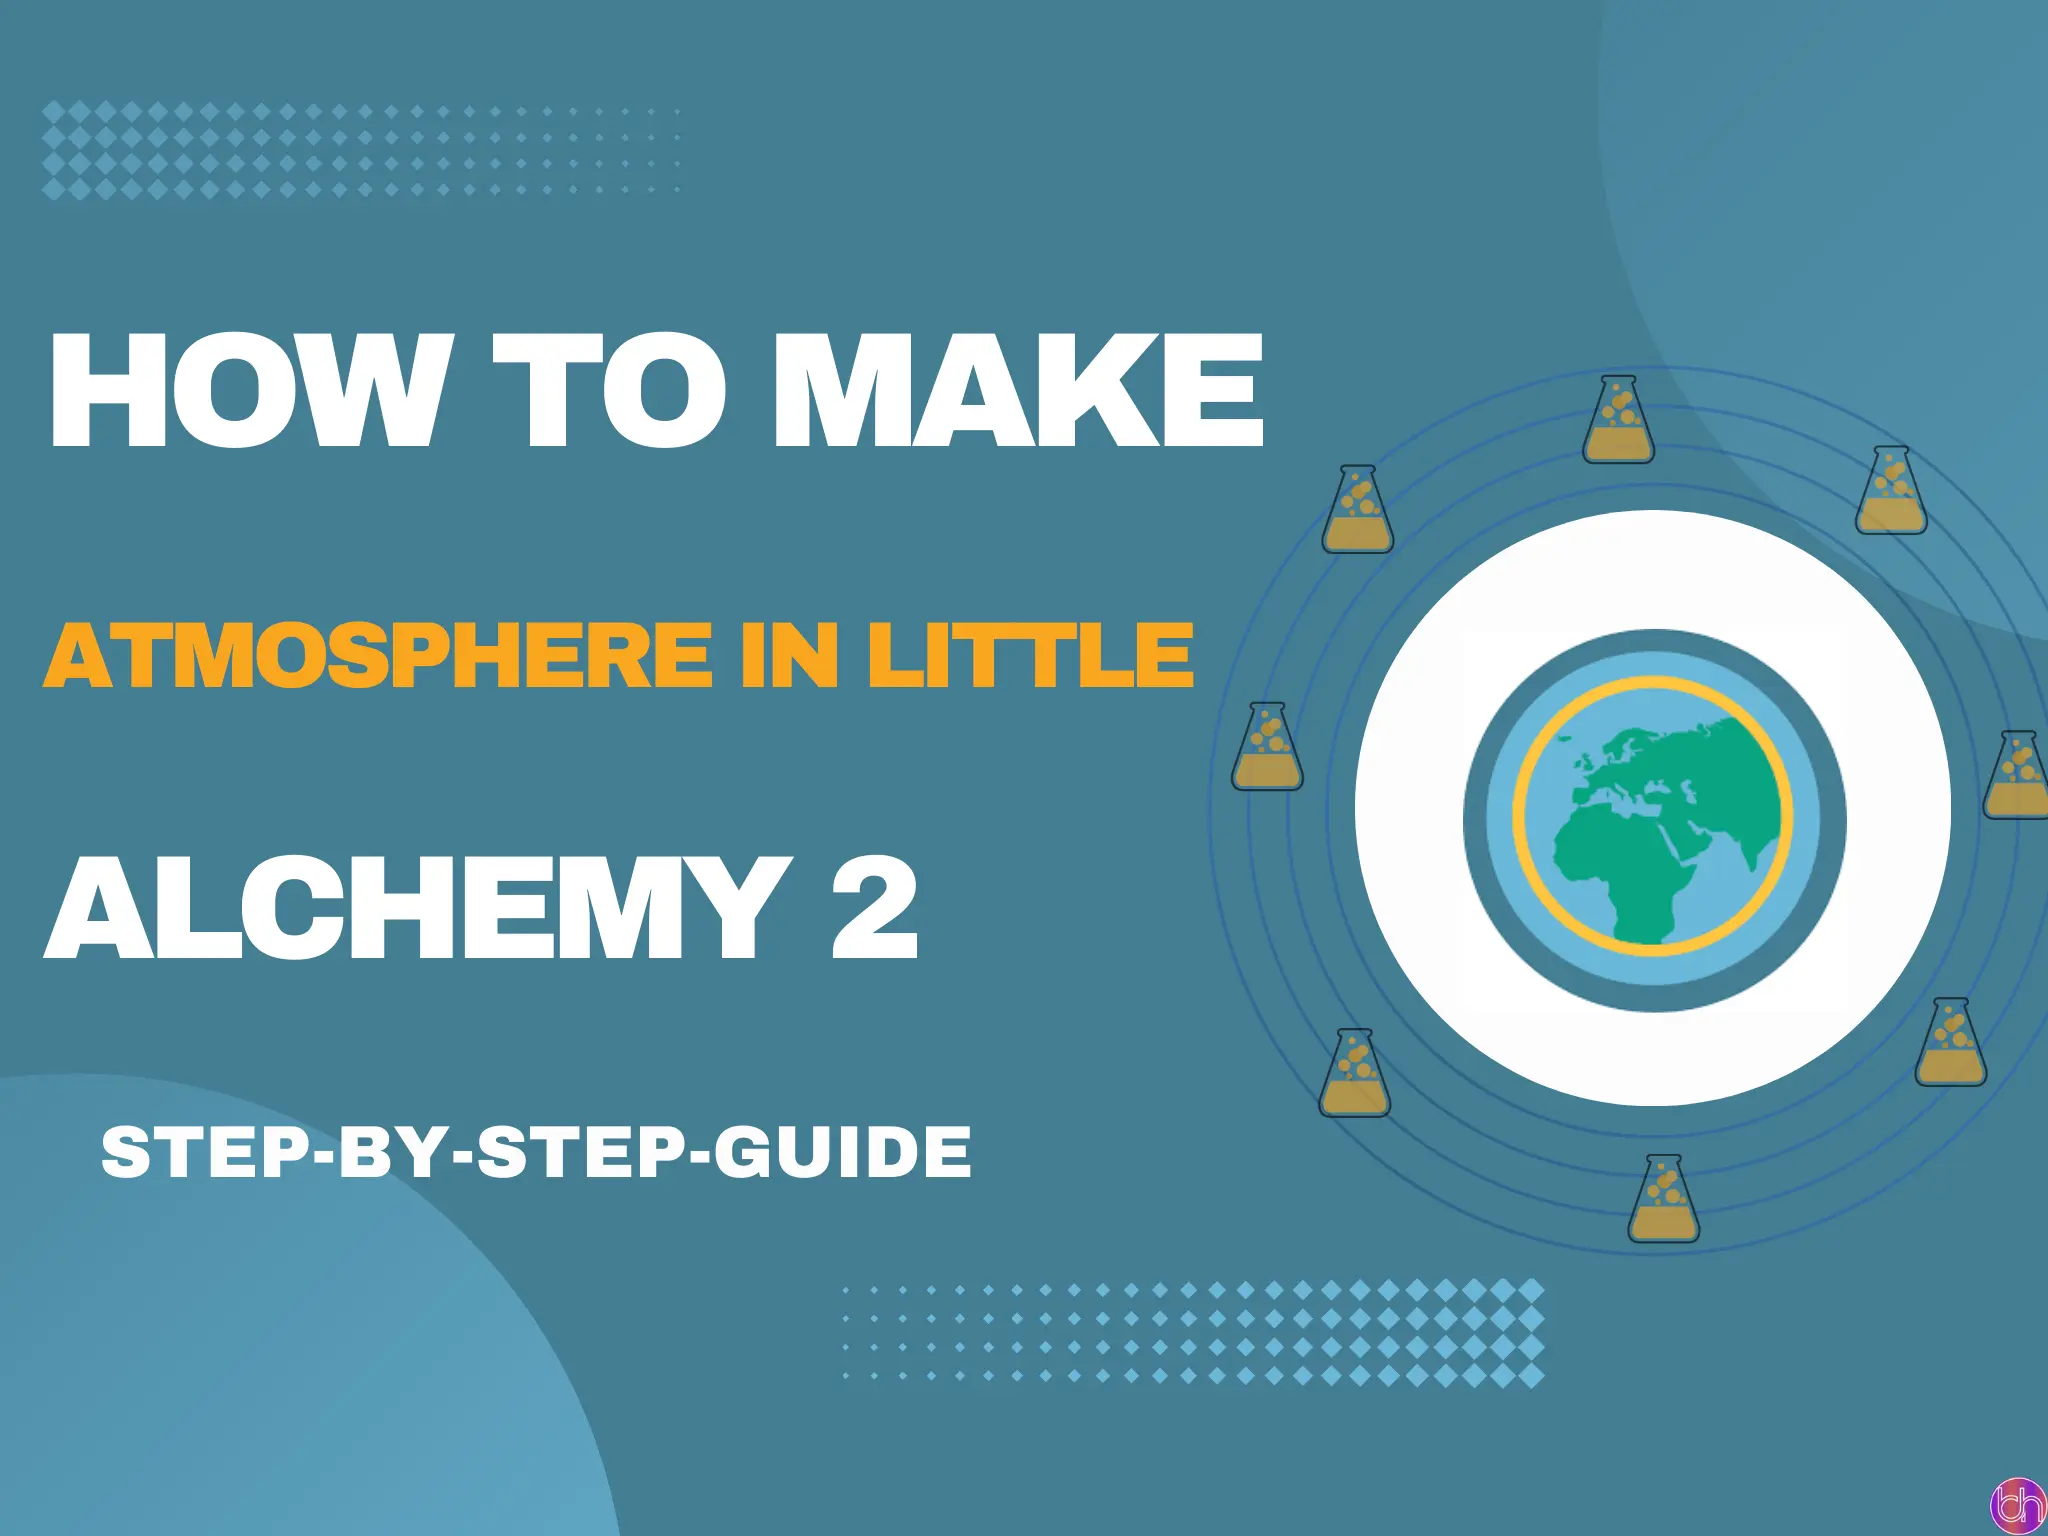 How to make Atmosphere in little alchemy 2